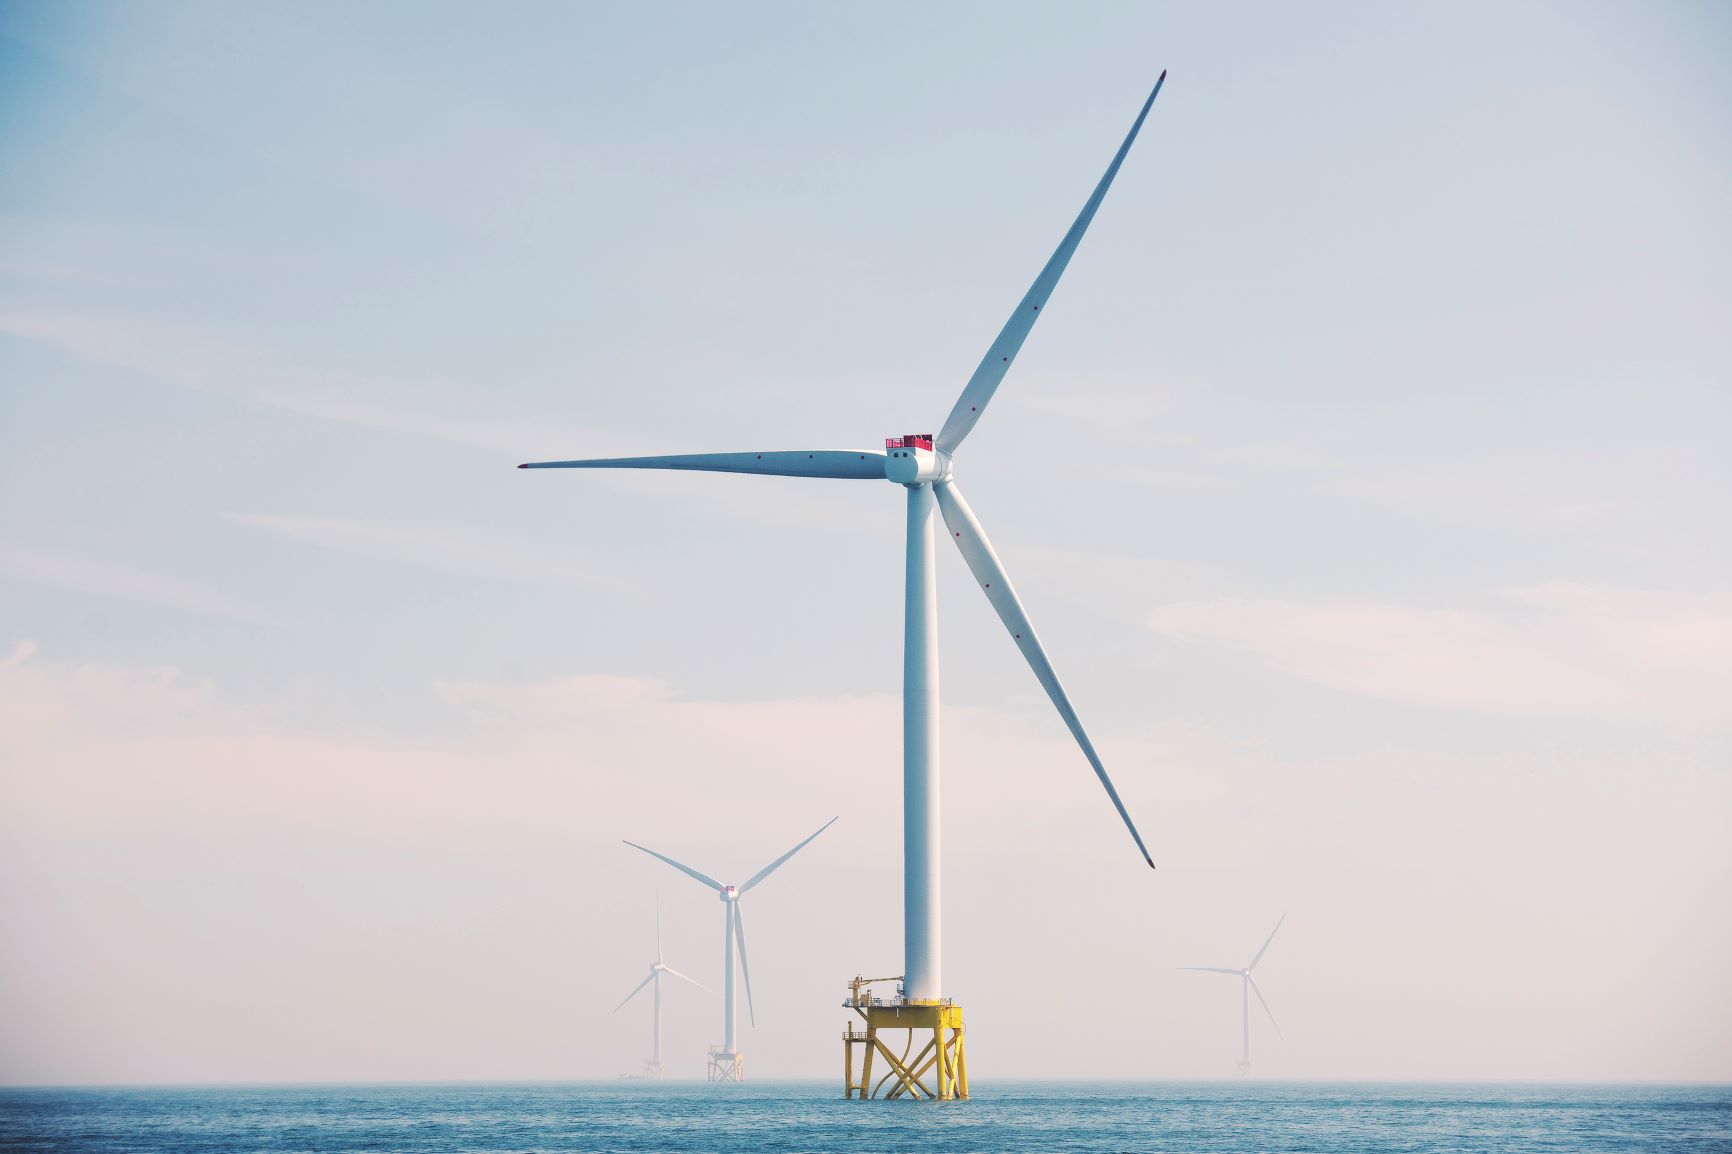 Crown Estate Scotland opens INTOG offshore wind leasing process